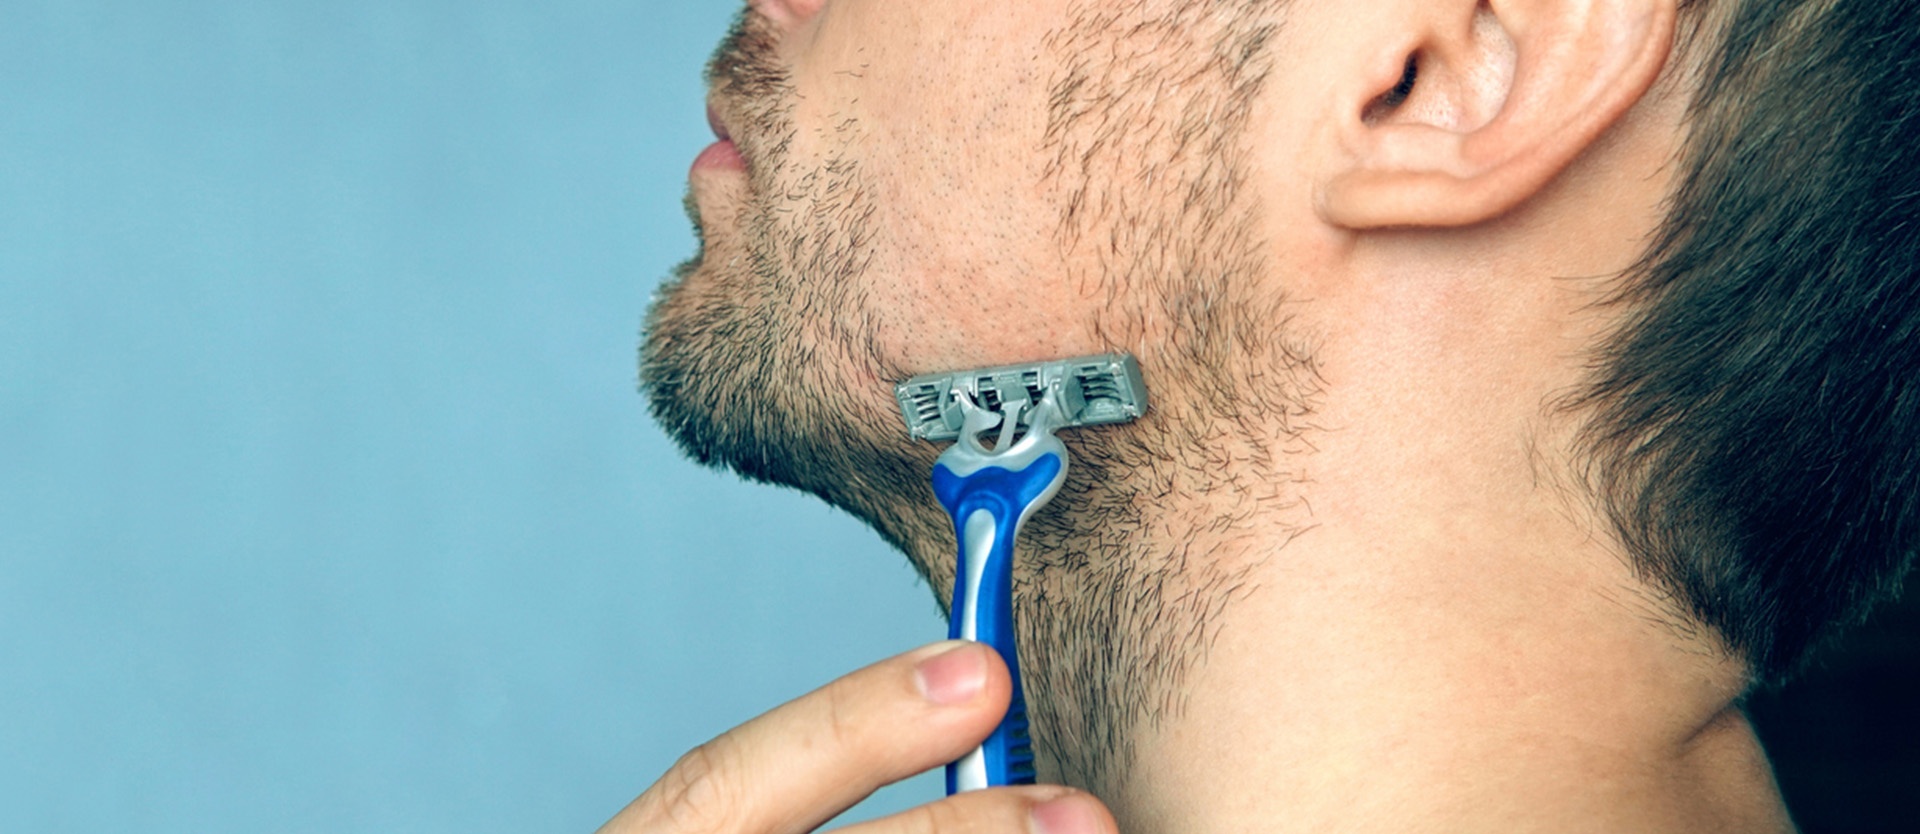 How to Treat or Manage Ingrown Hairs